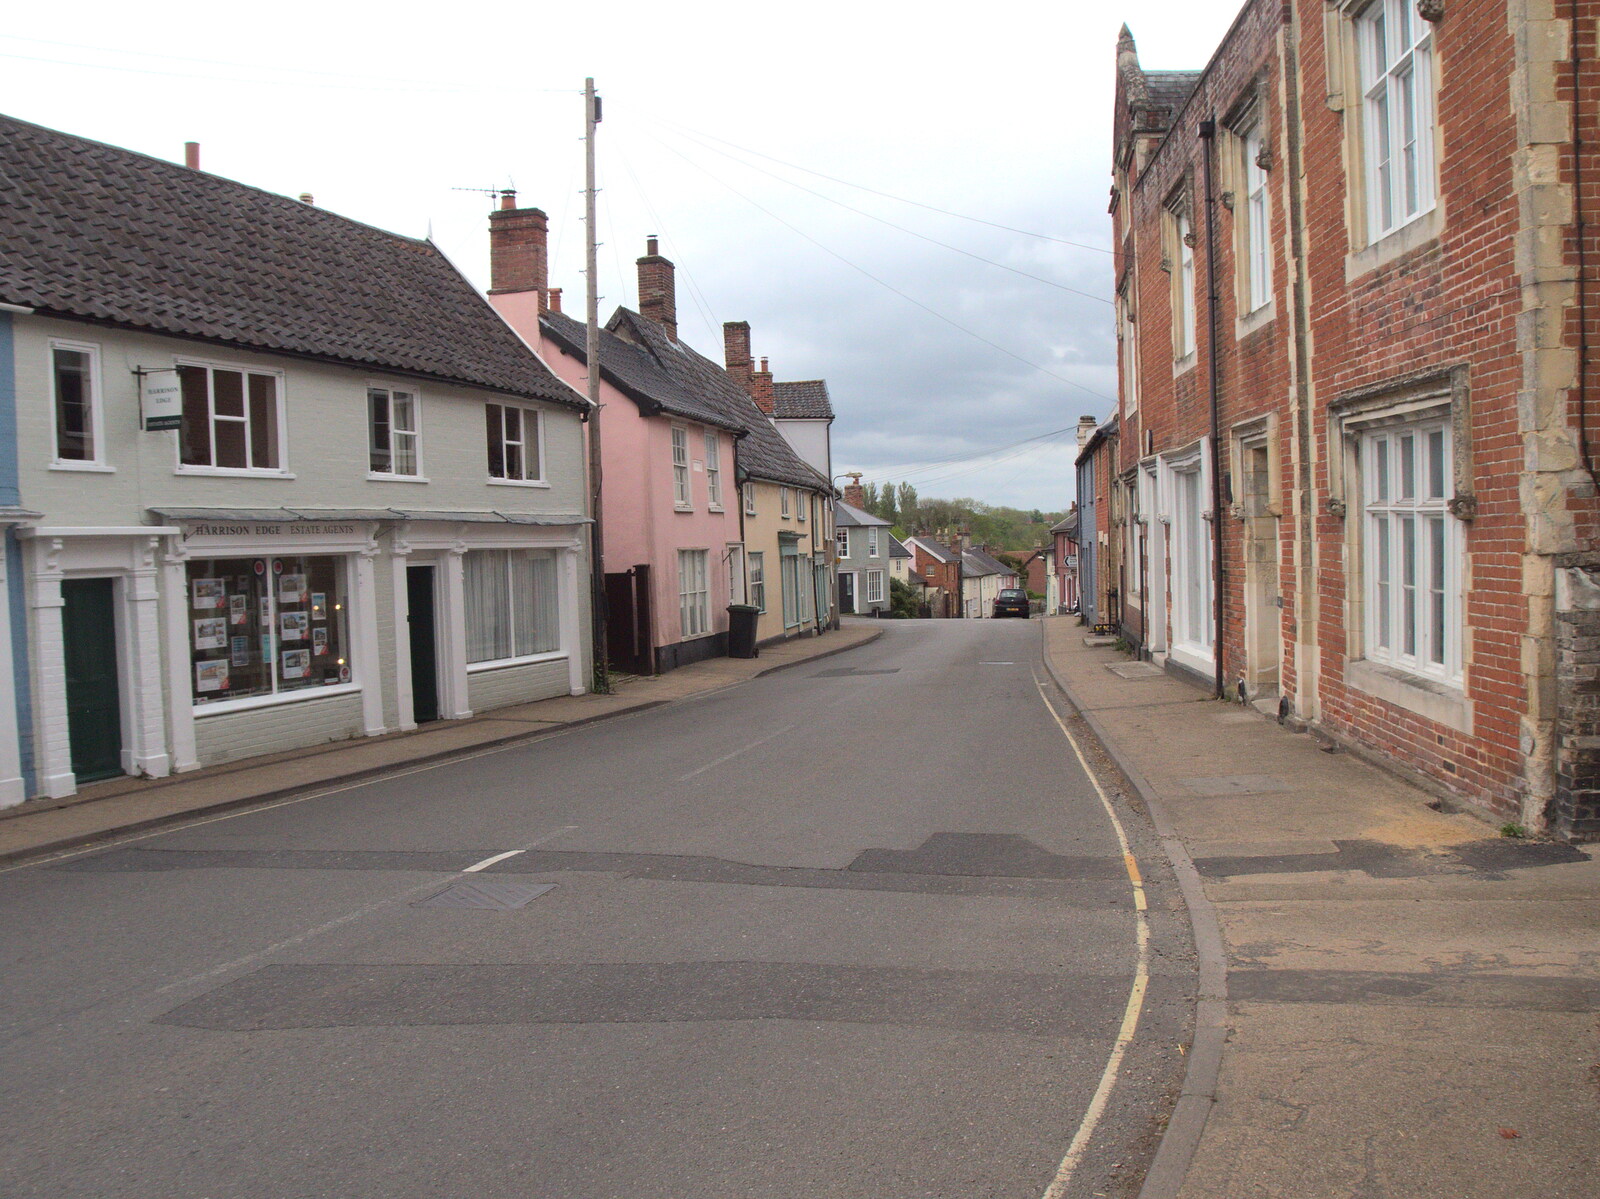 In Eye, looking towards Lowgate Street from Garden Centres, and Hamish Visits, Brome, Suffolk - 28th May 2021